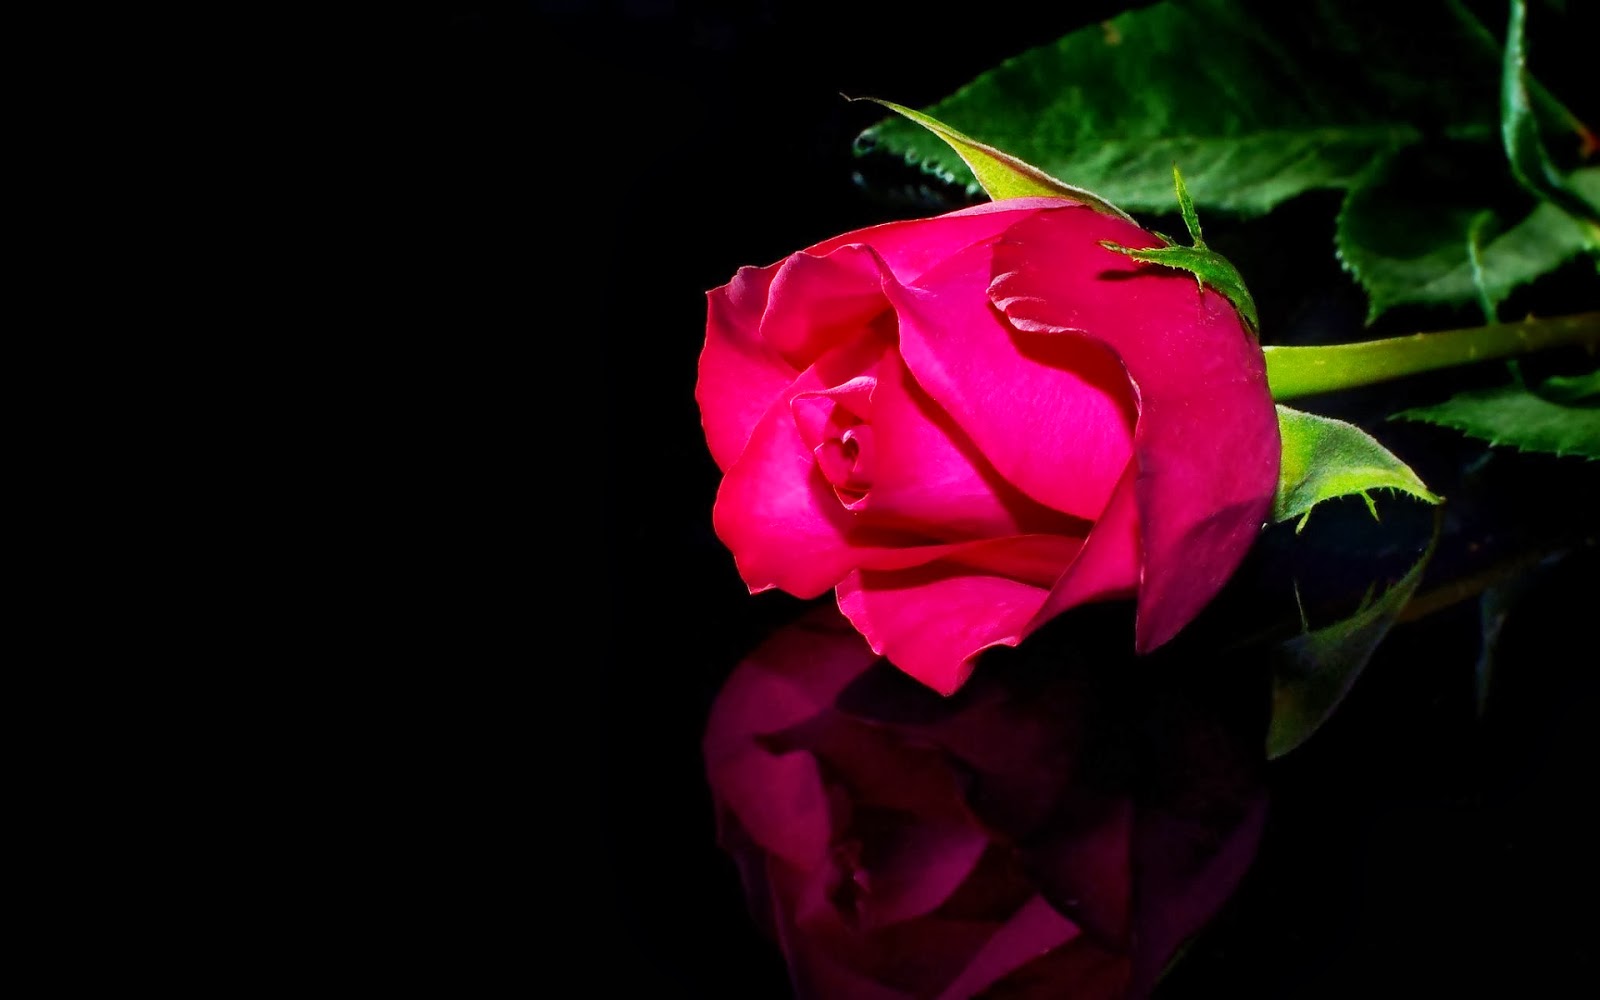 Black Background Images With Roses 1600x1000 Wallpaper Teahub Io